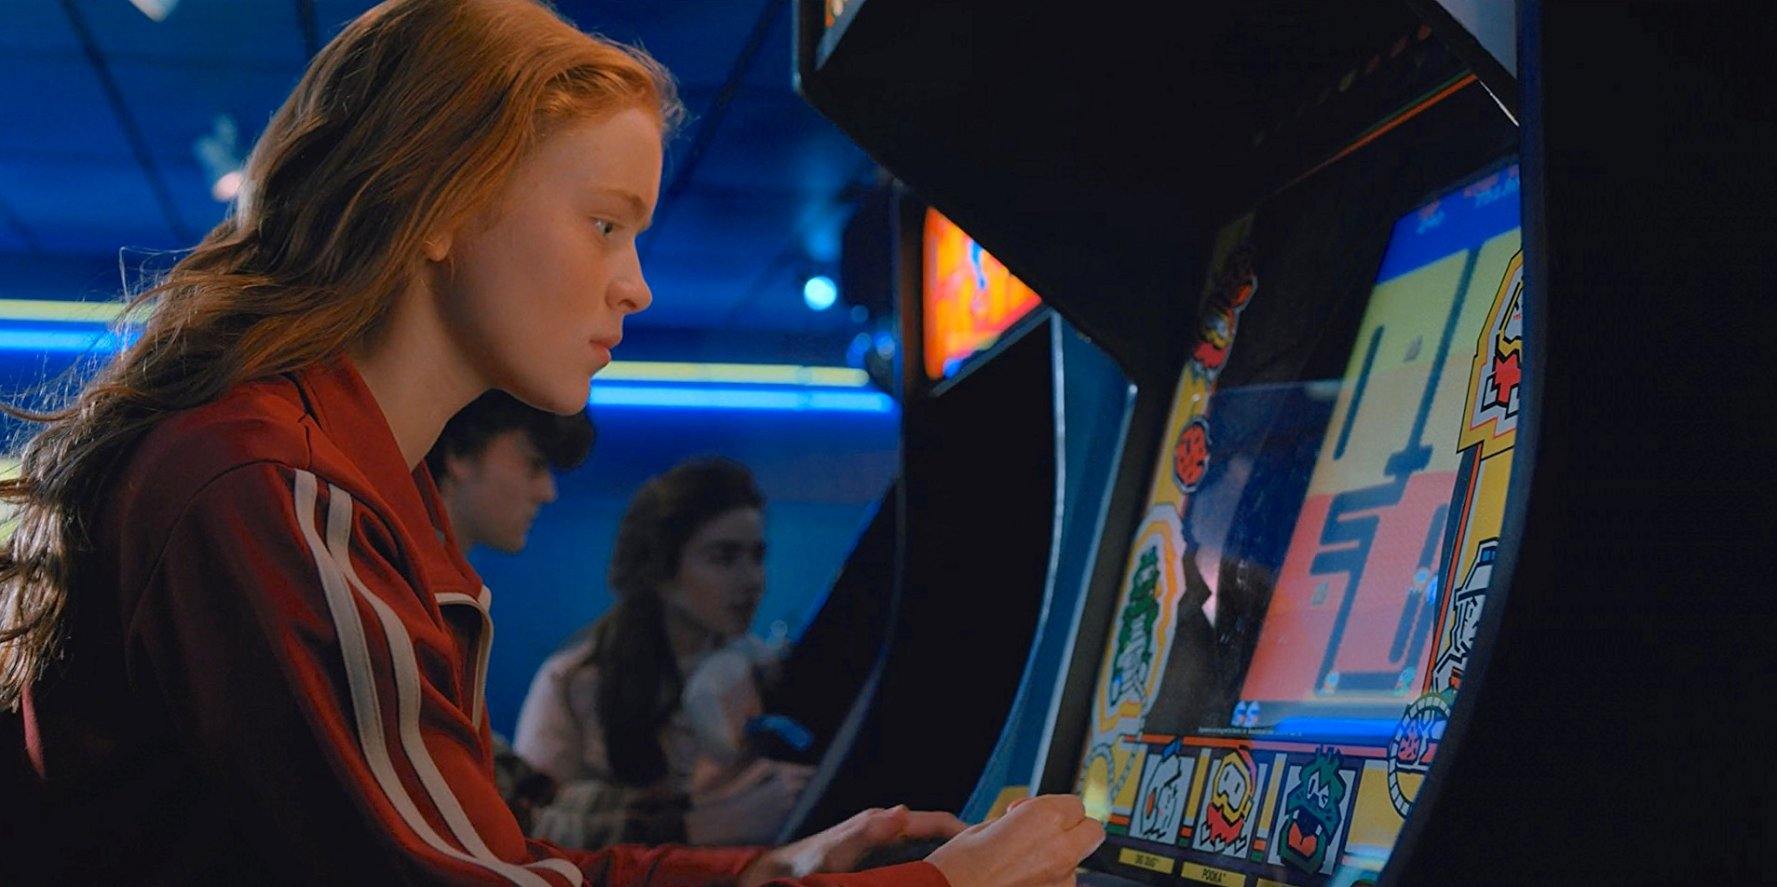 Sadie Sink as Max playing an old-fashioned video game machine in Stranger Things 2